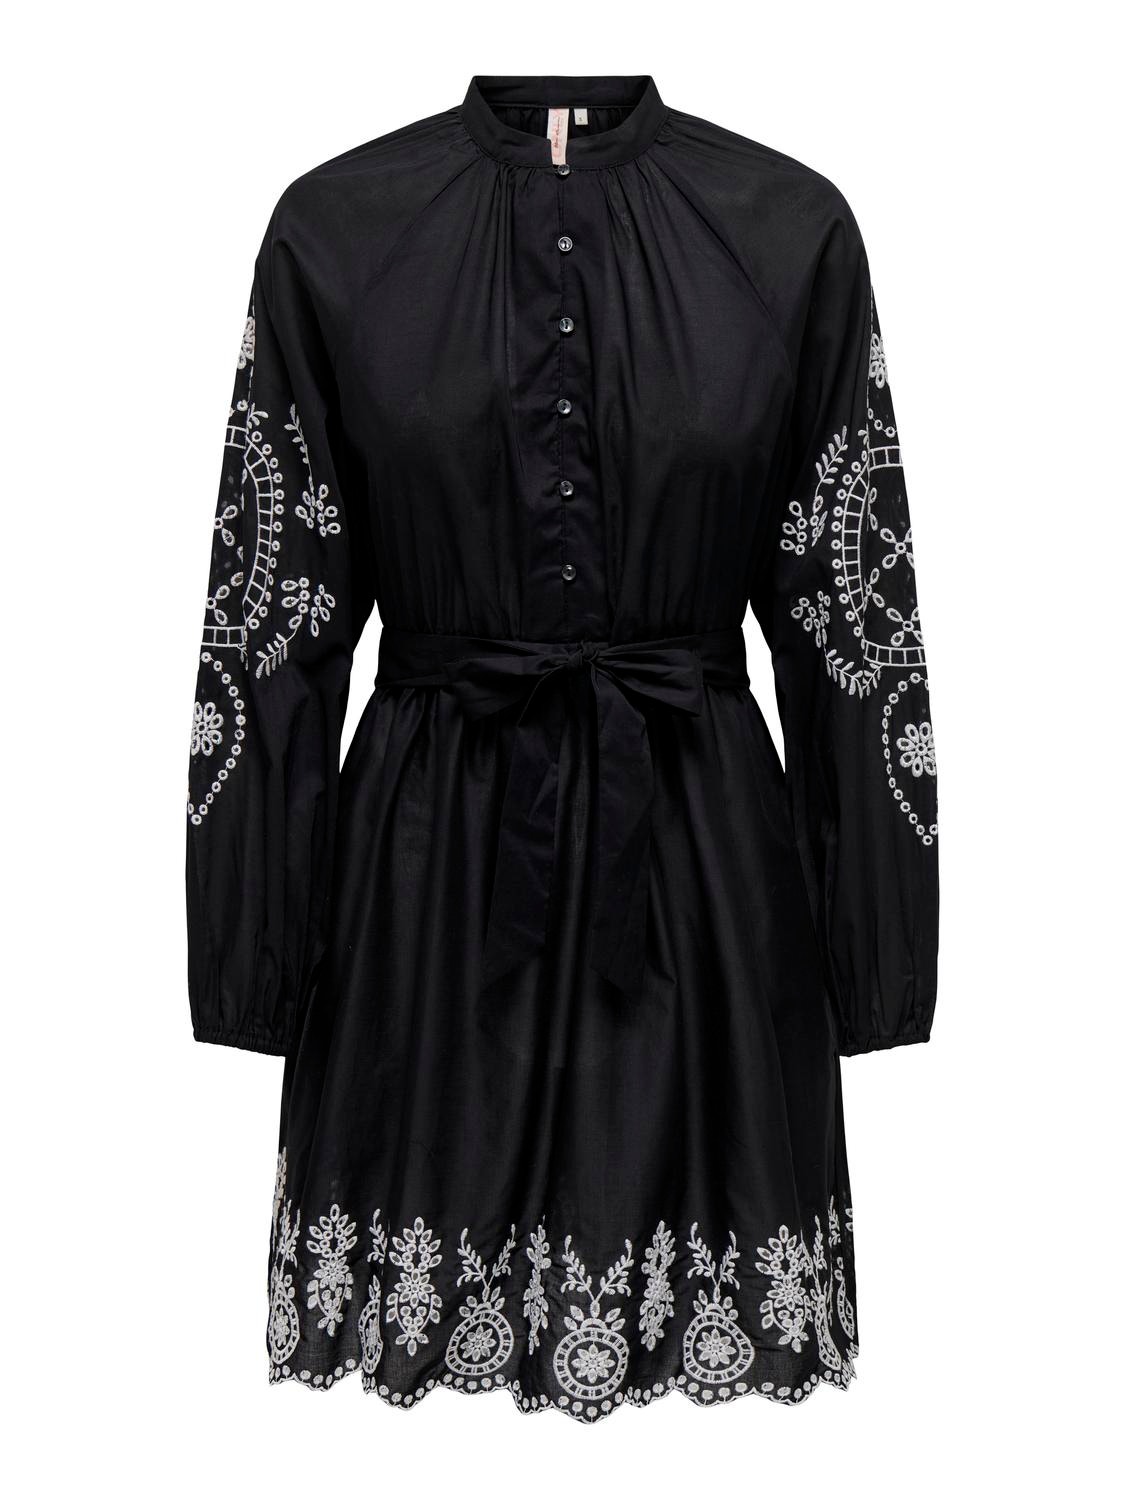 ONLY Mini dress with broderie anglaise -Black - 15319190